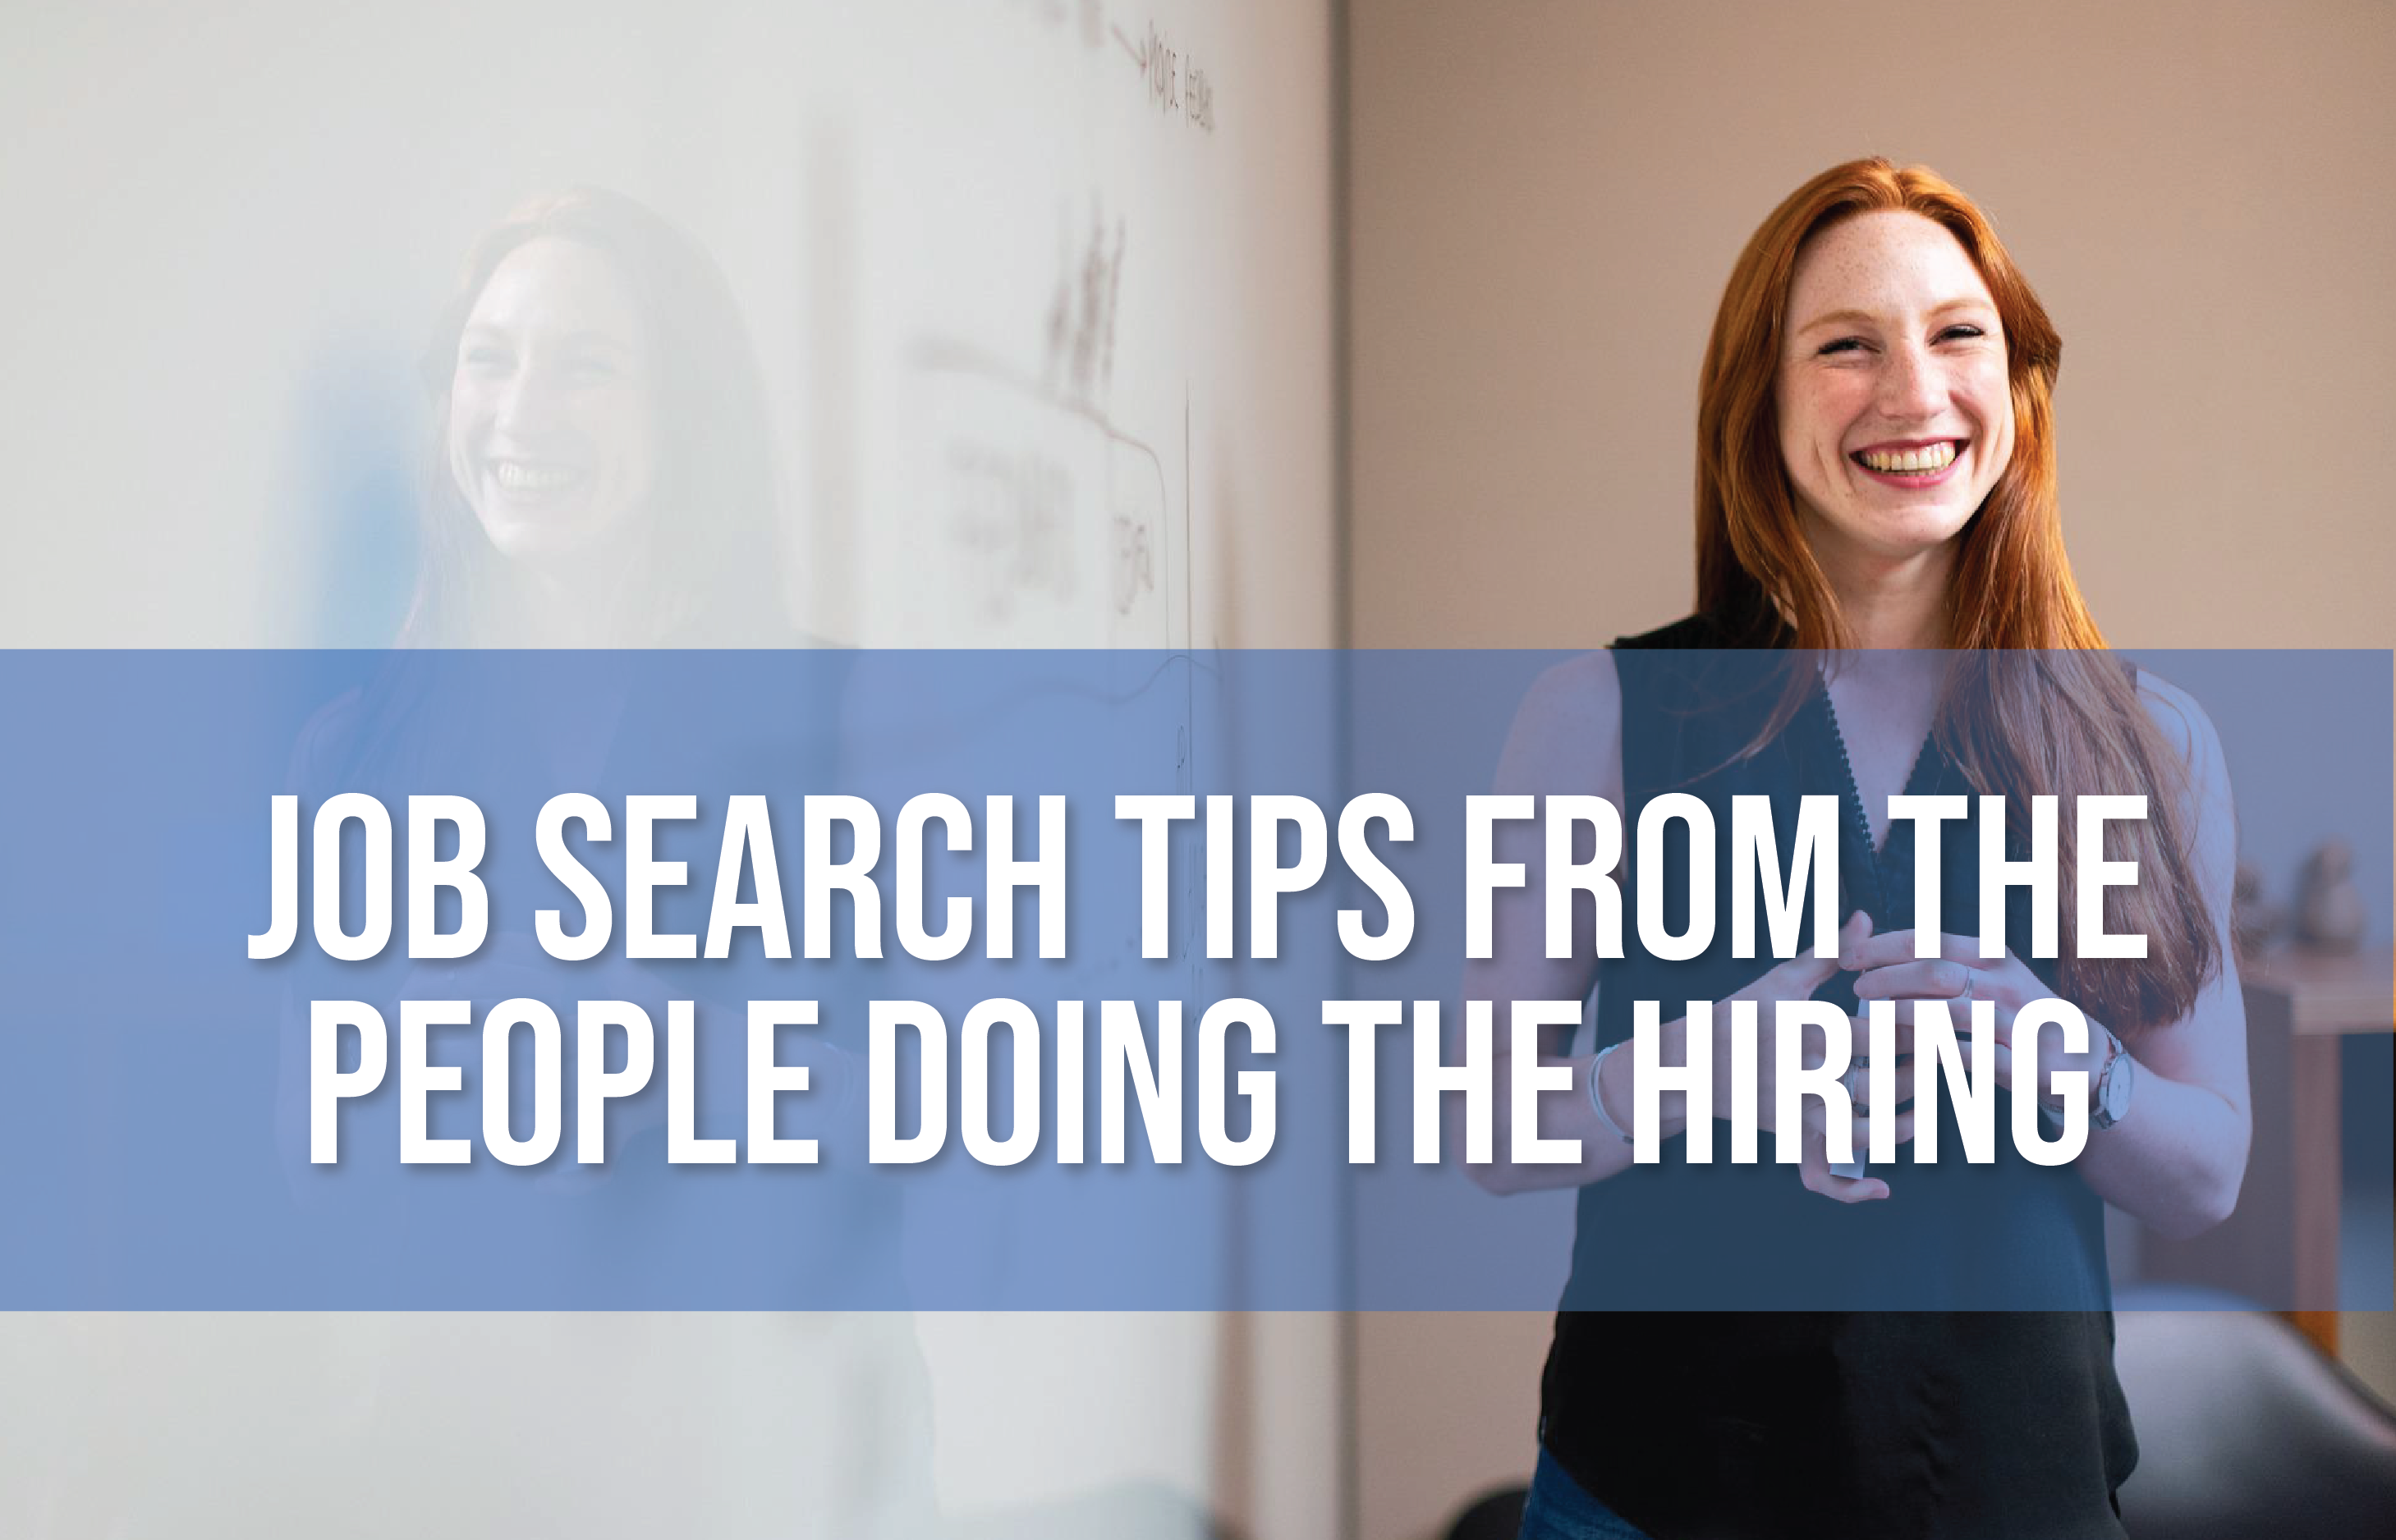 Job search tips from the people doing the hiring